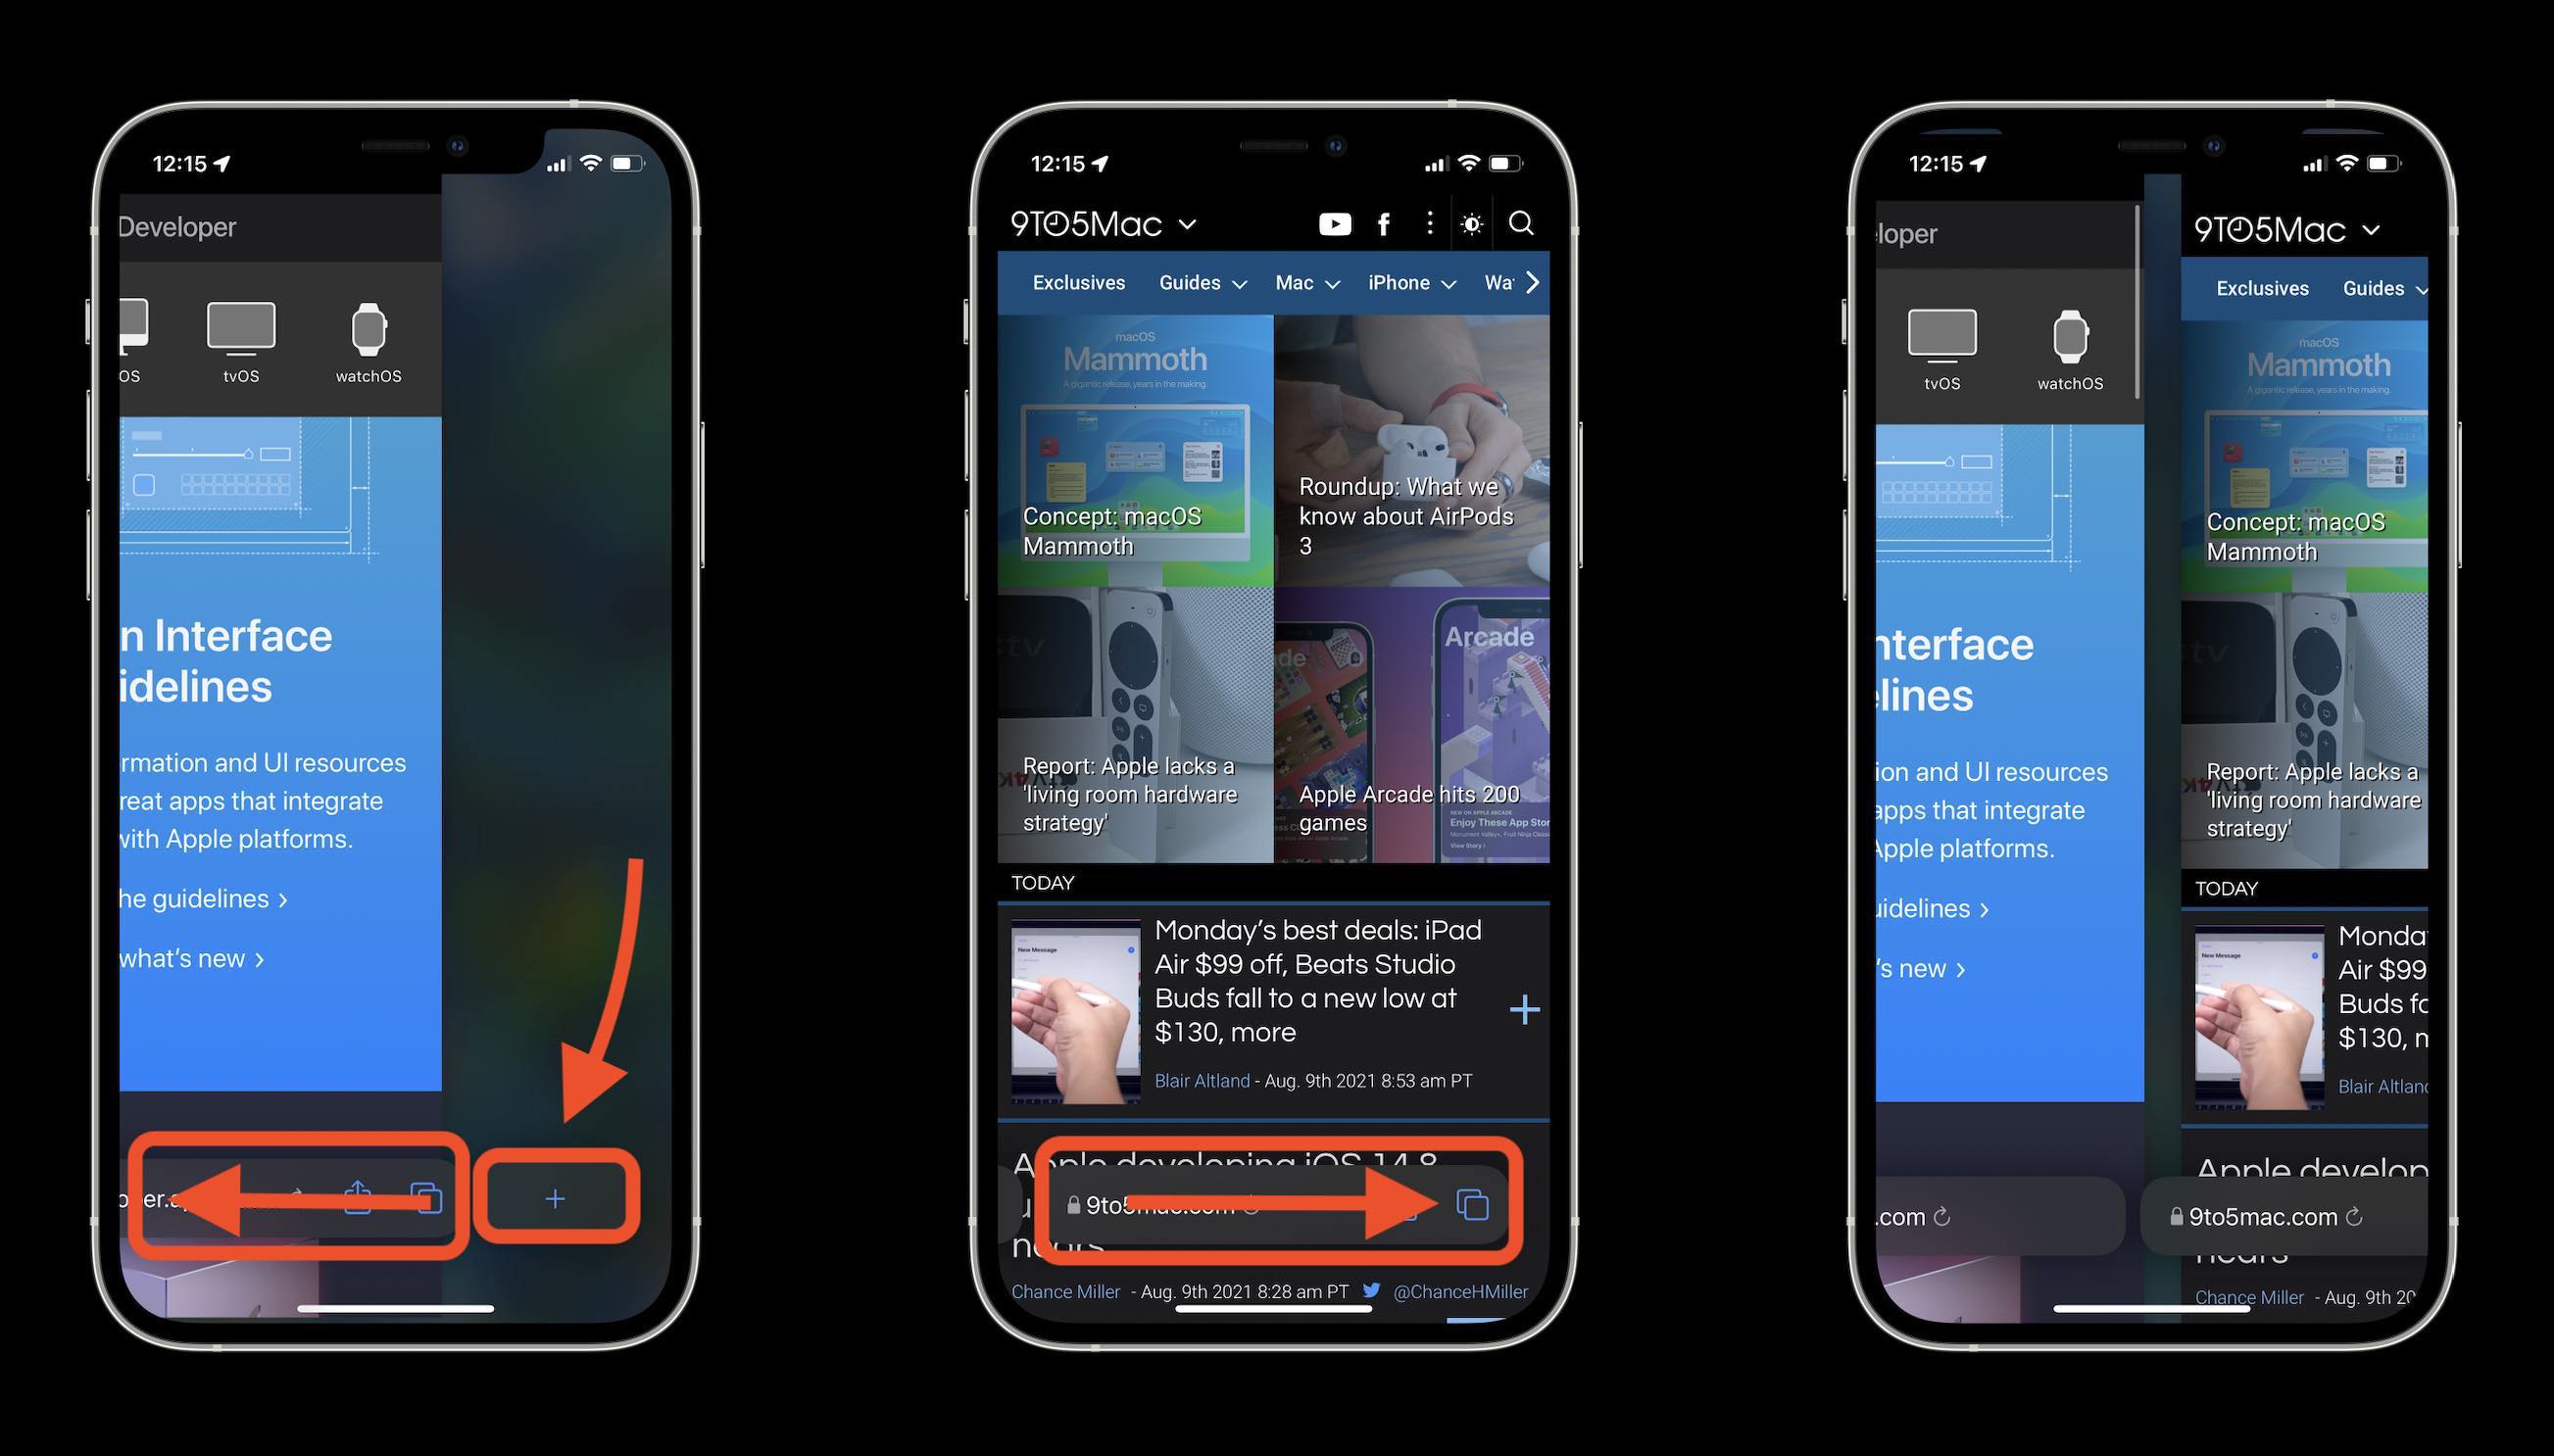 How Safari in iOS 15 works - swipe on the search/tab bar to open a new page or switch between open pages